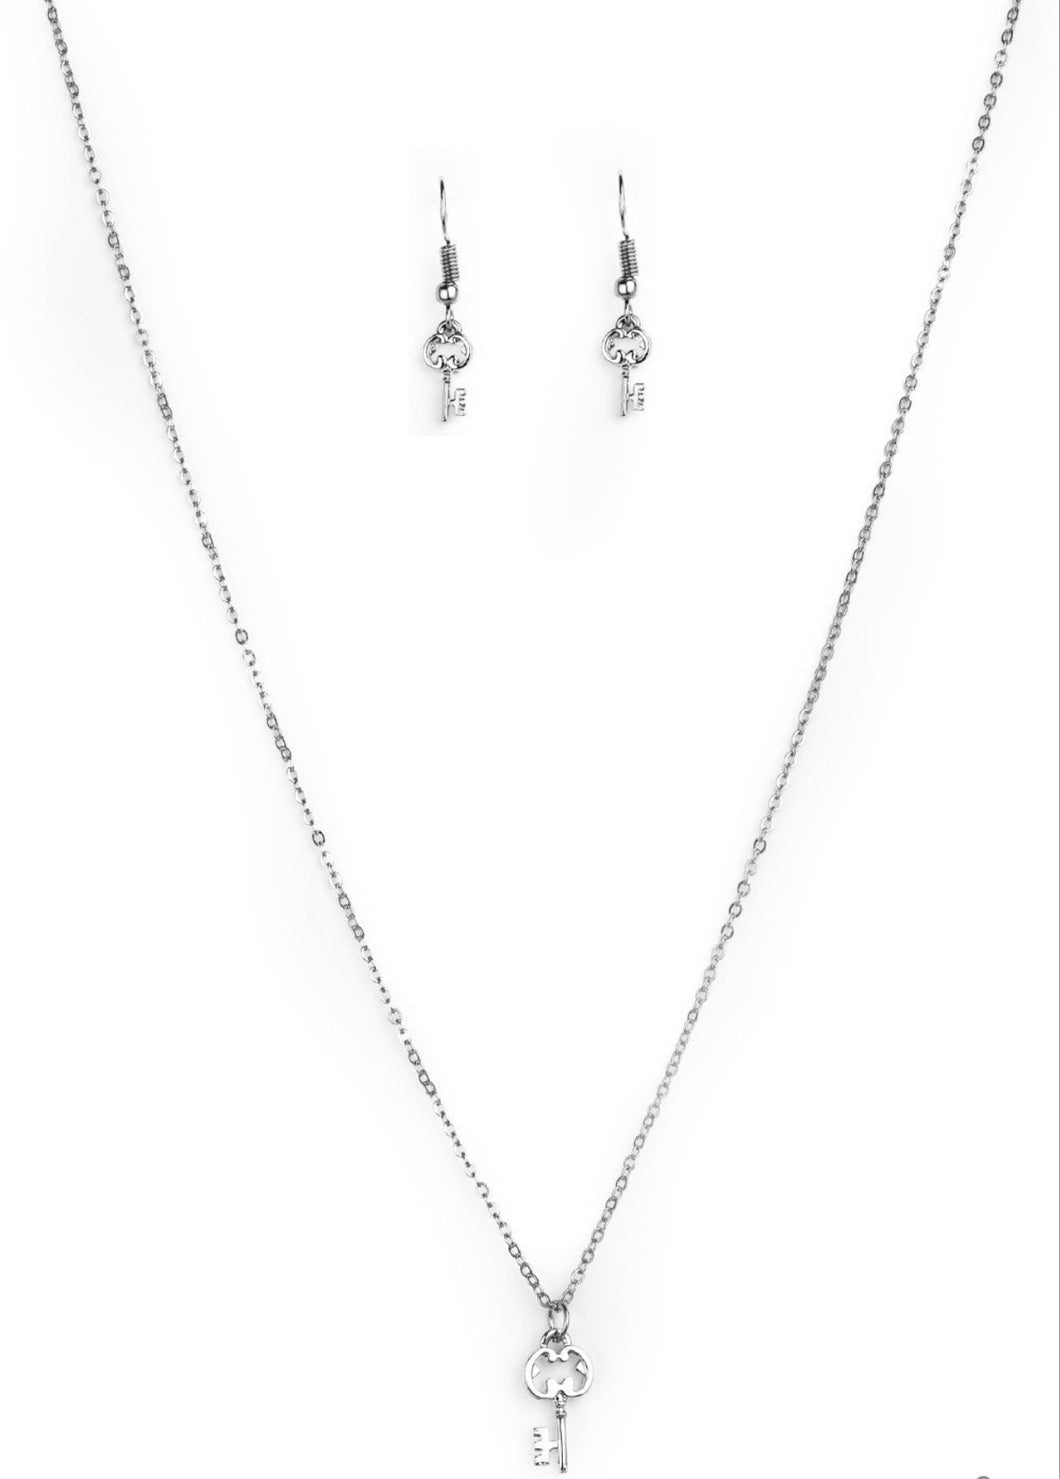 Very Low Key Silver Necklace and Earrings